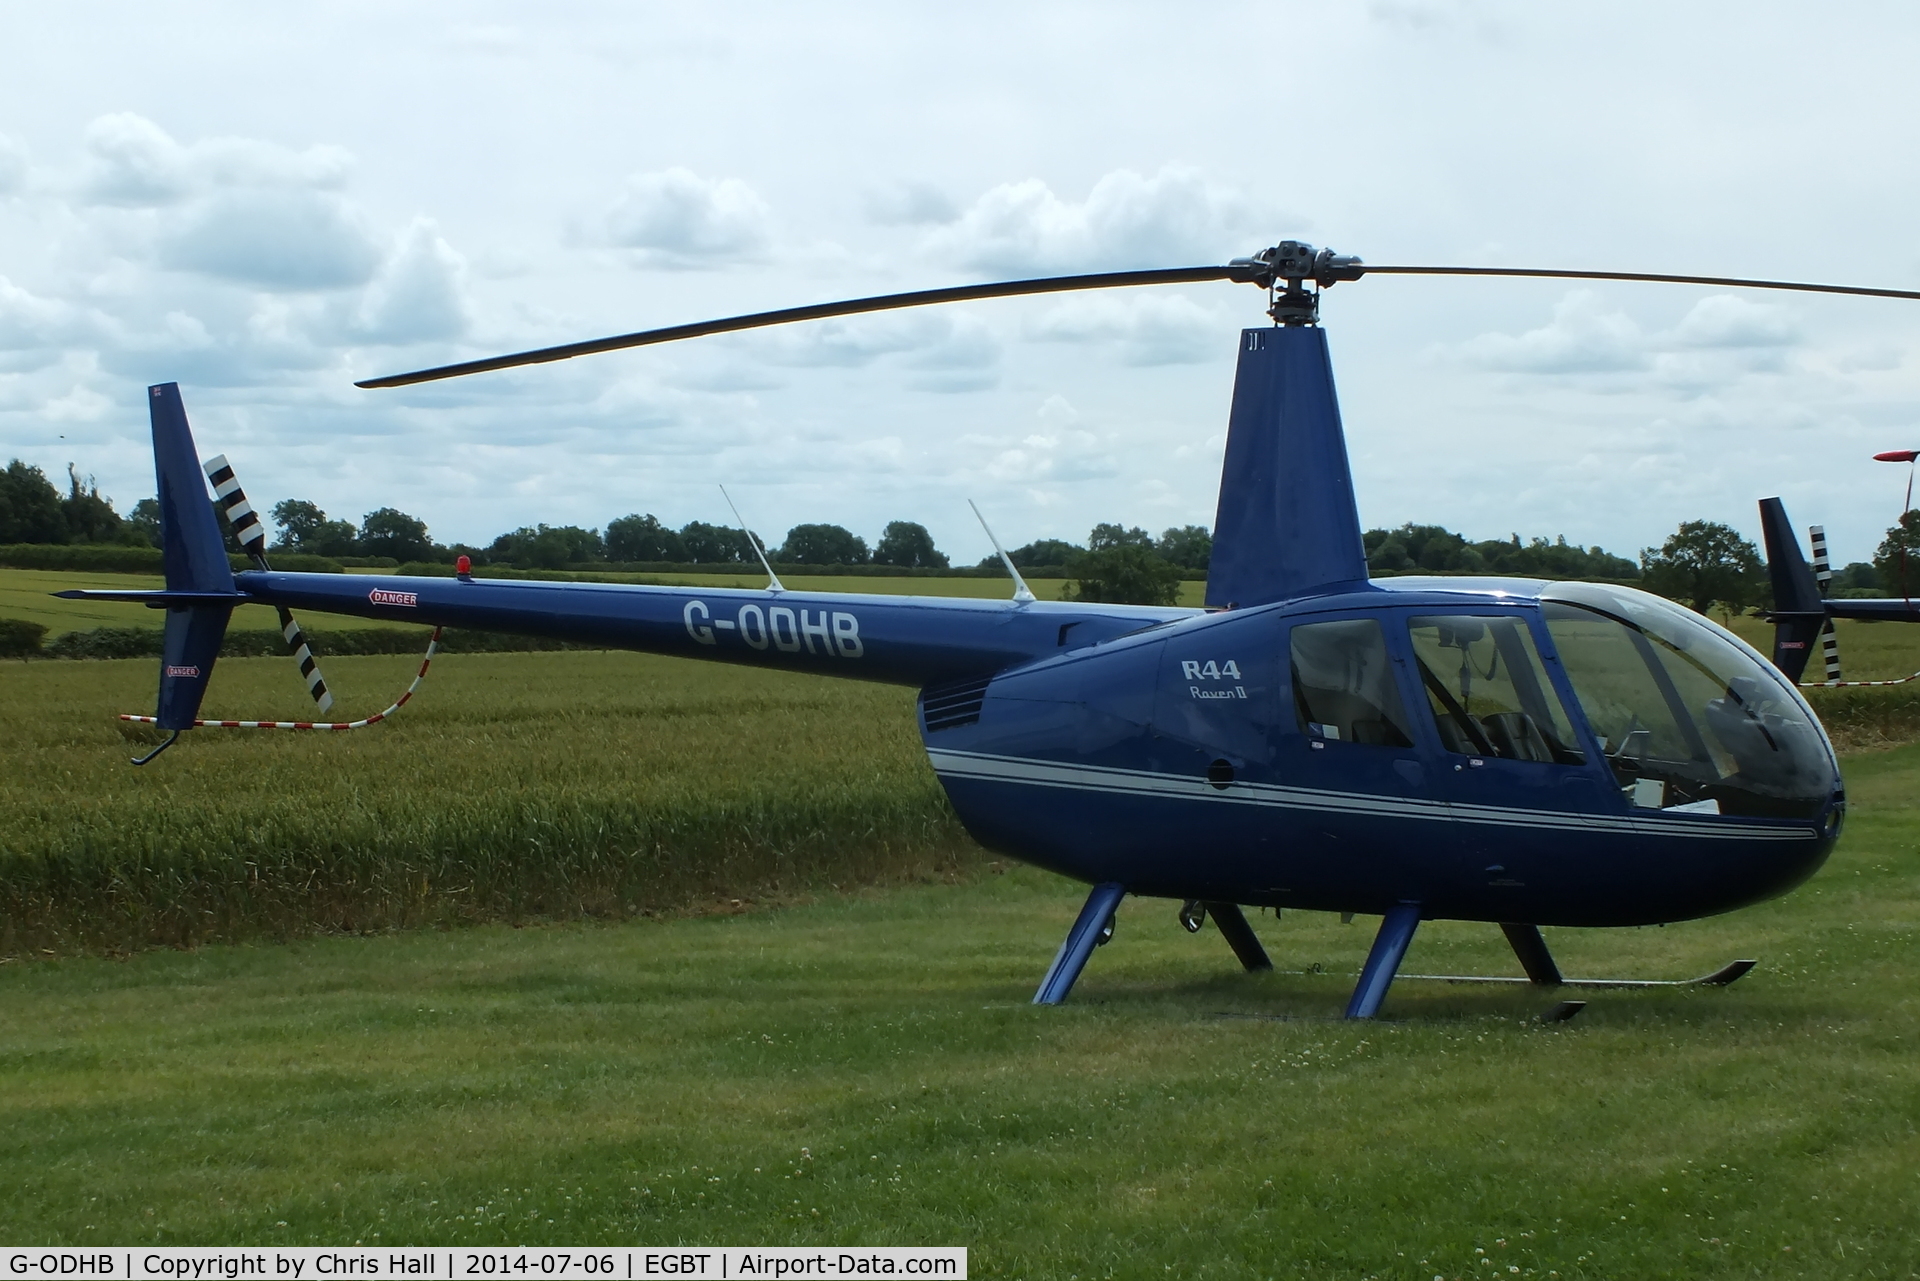 G-ODHB, 2005 Robinson R44 Raven II C/N 10985, ferrying race fans to the British F1 Grand Prix at Silverstone